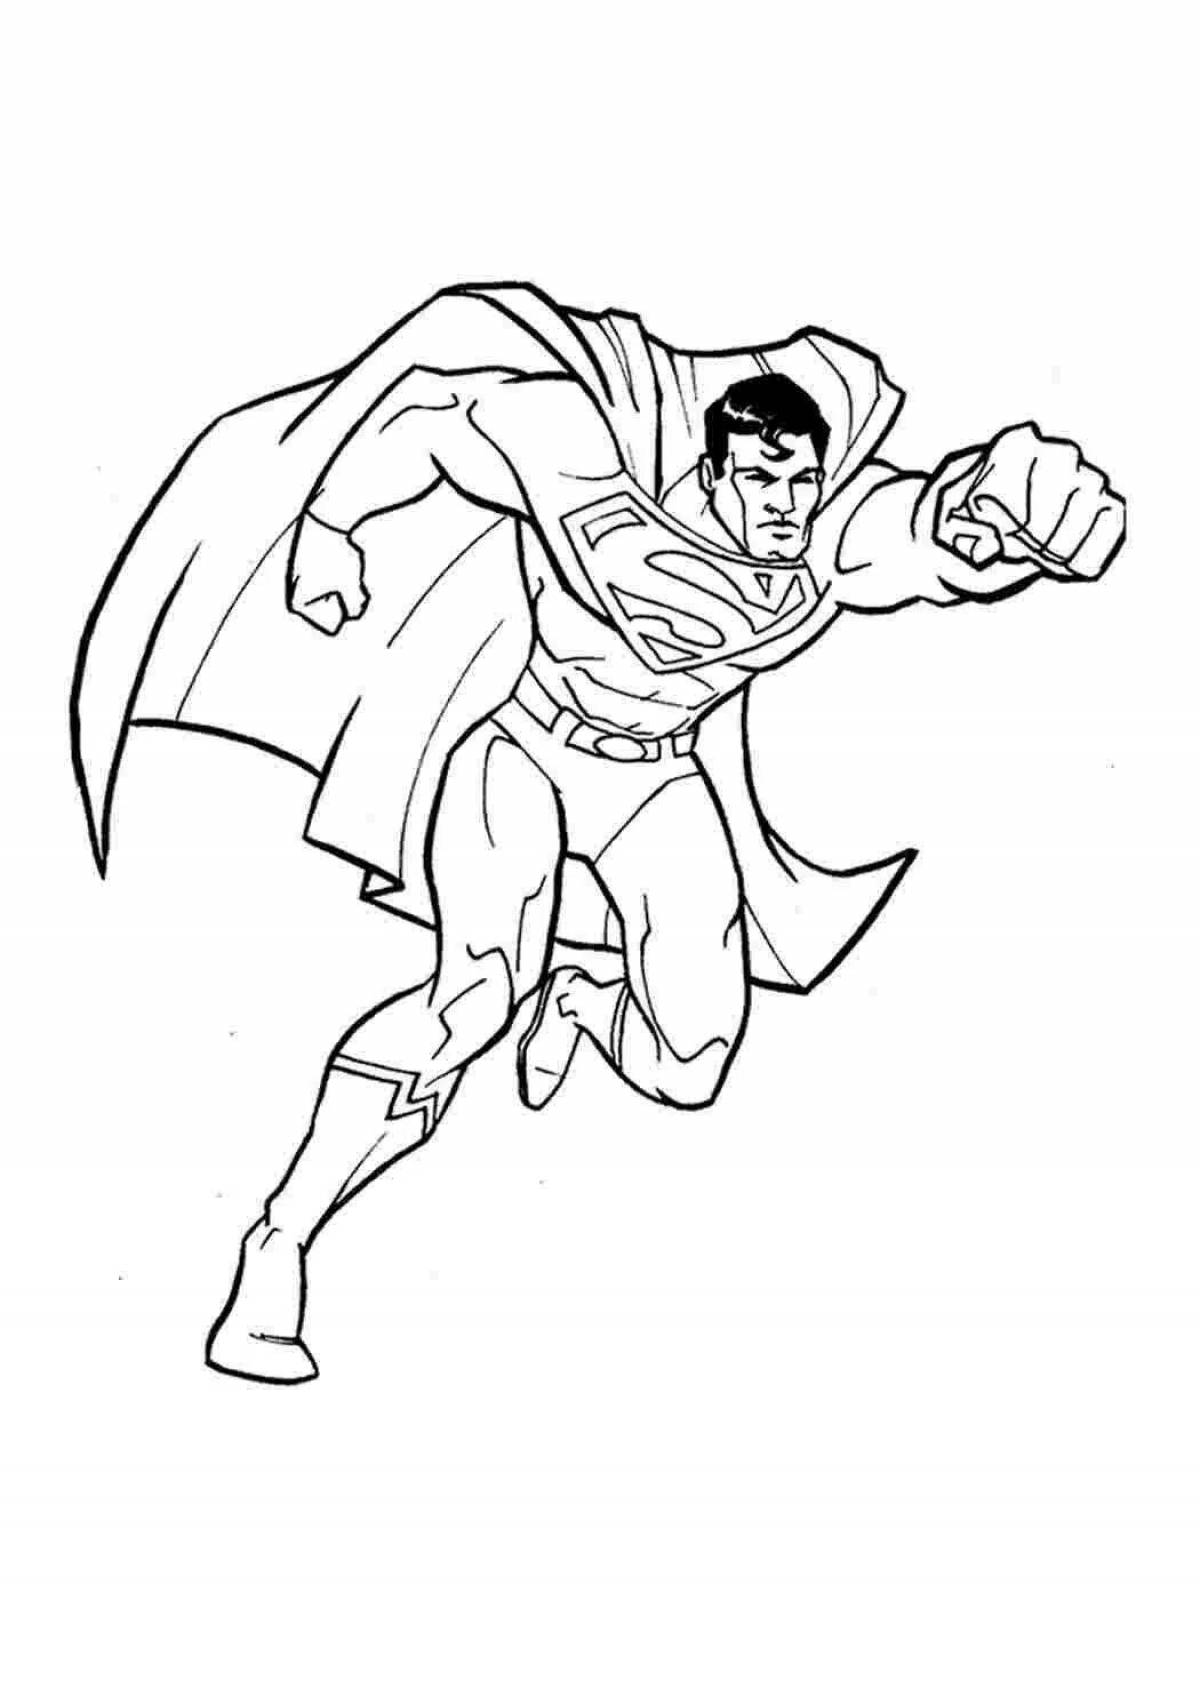 Colorful superman coloring book for kids